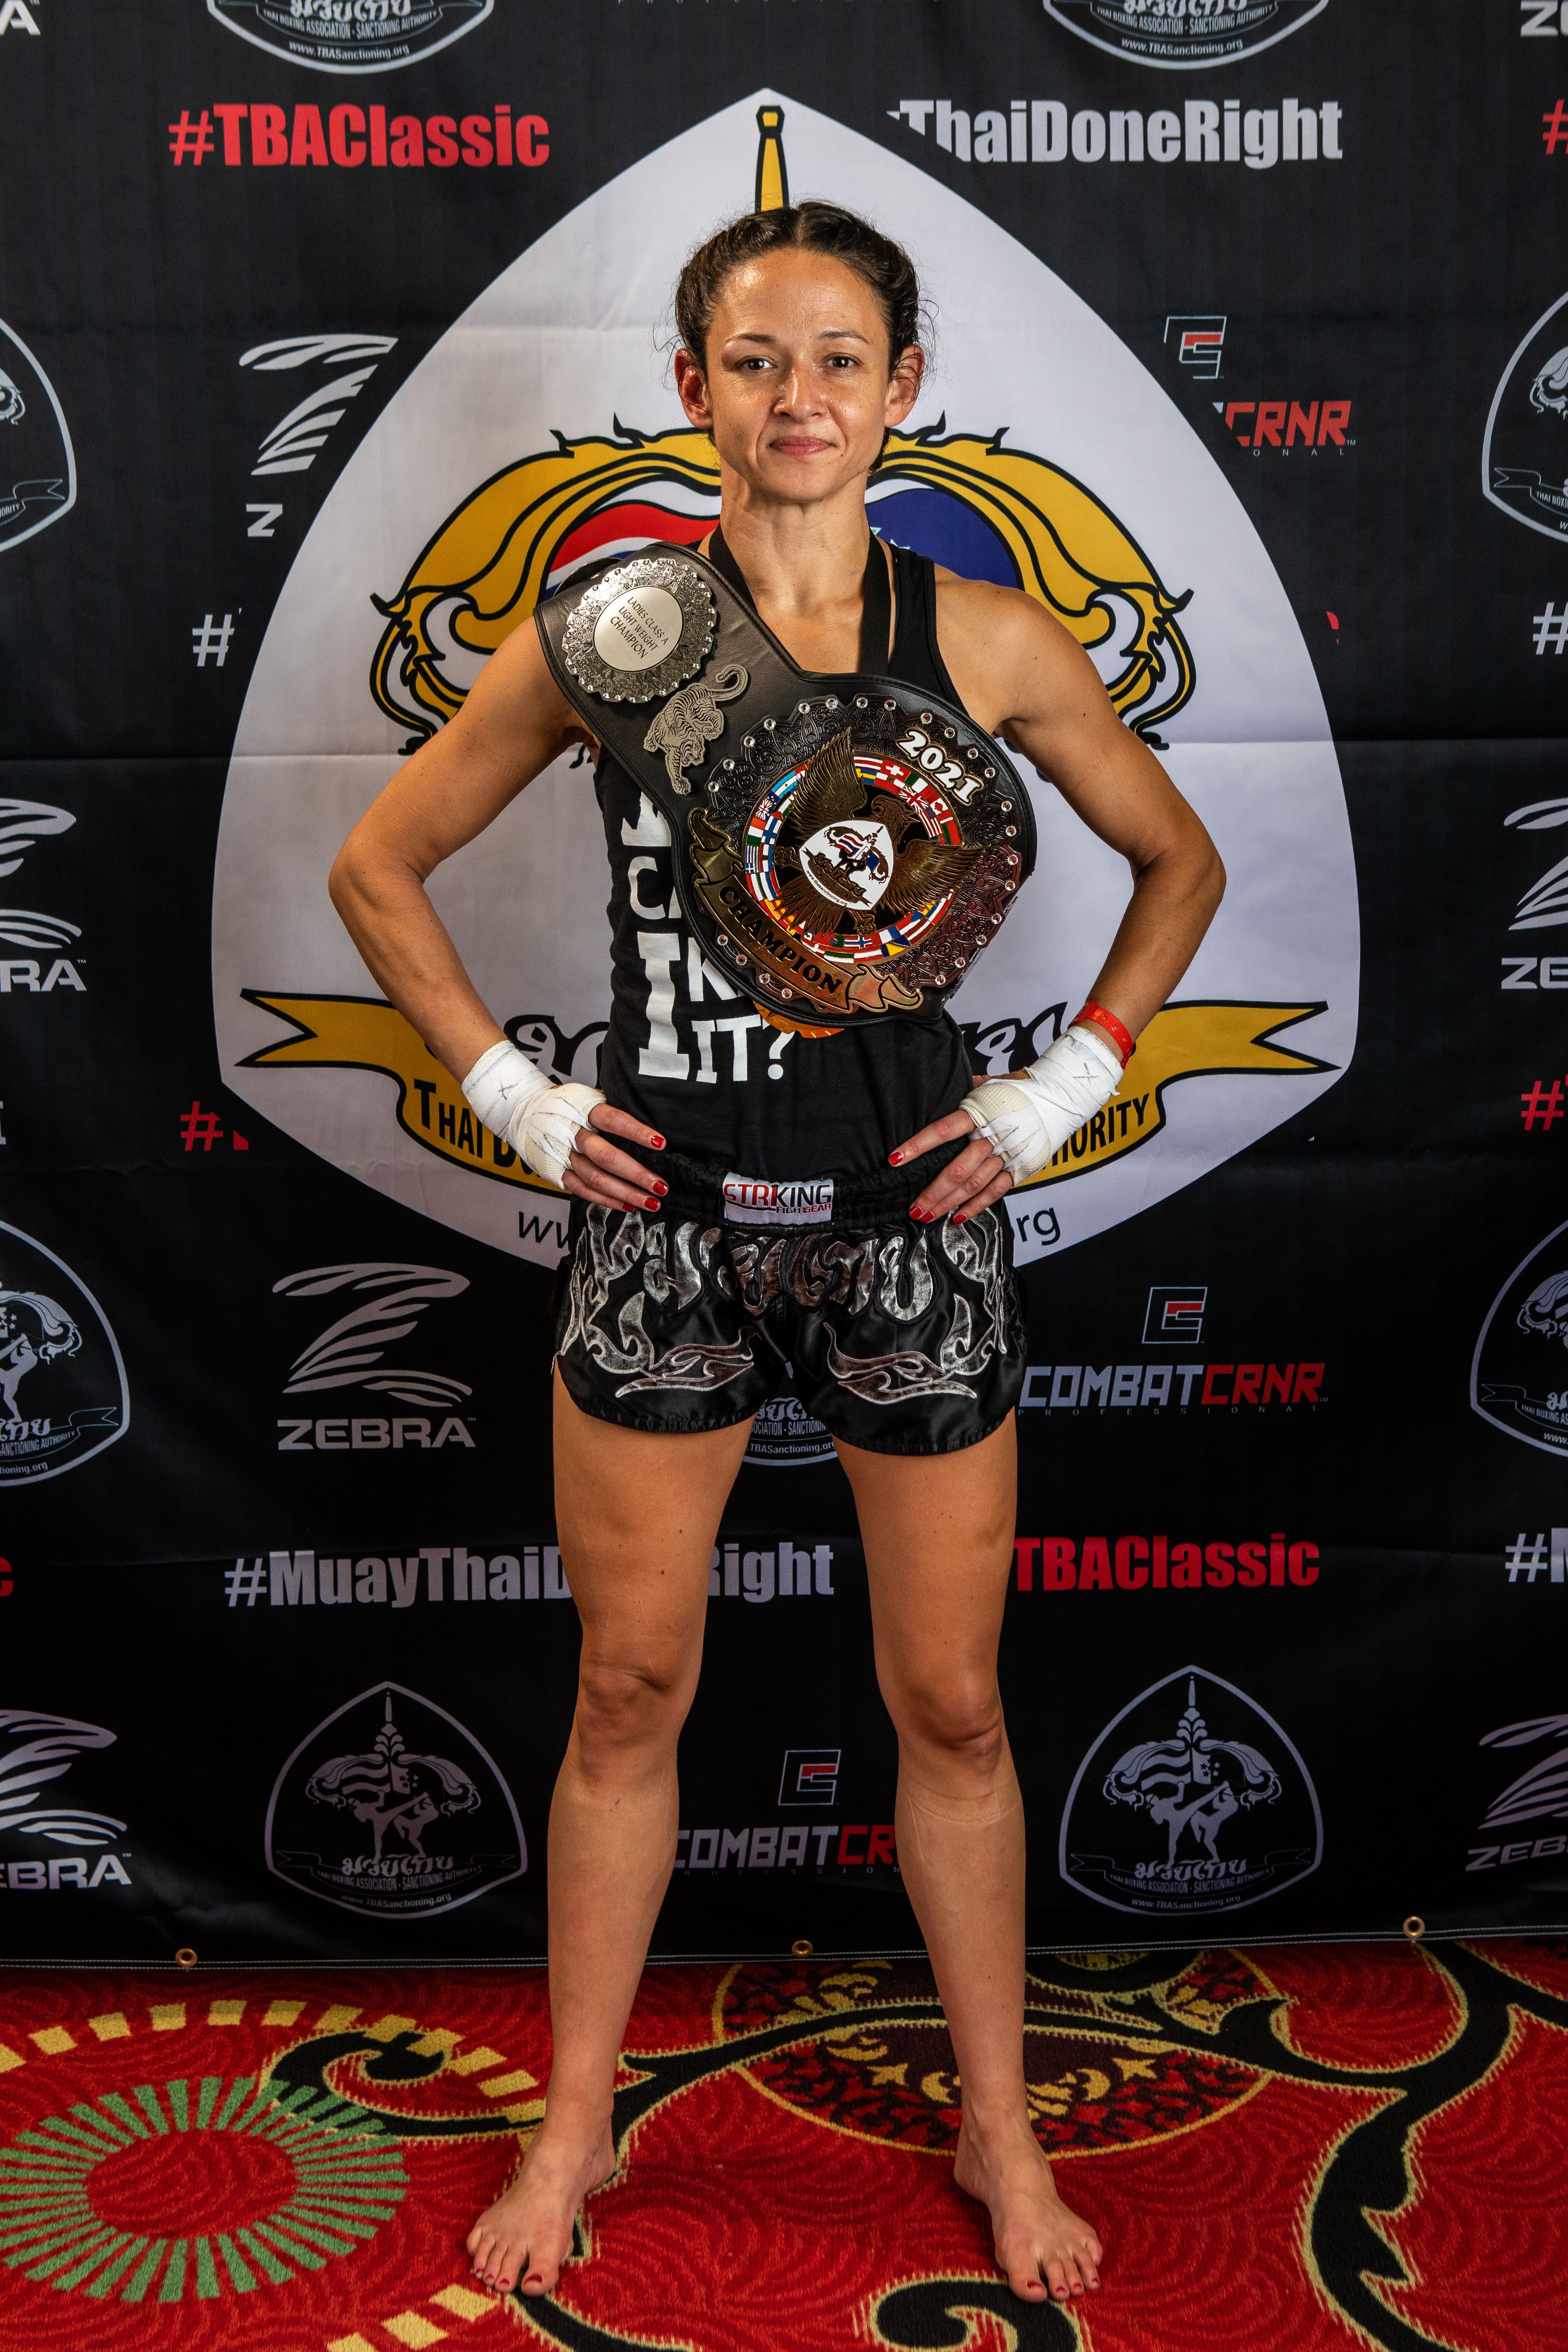 Elise “The Piece” KO’s Two Opponents to Win TBA Classic Title!